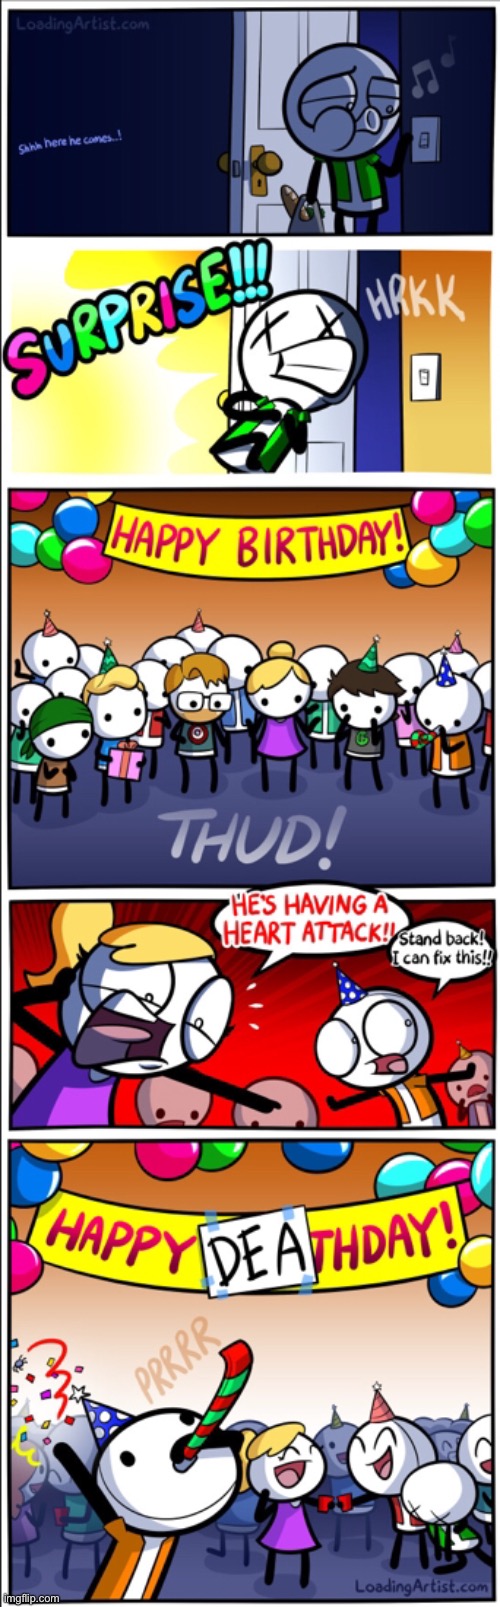 #1,452 | image tagged in comics/cartoons,comics,loading,artist,party,heart attack | made w/ Imgflip meme maker